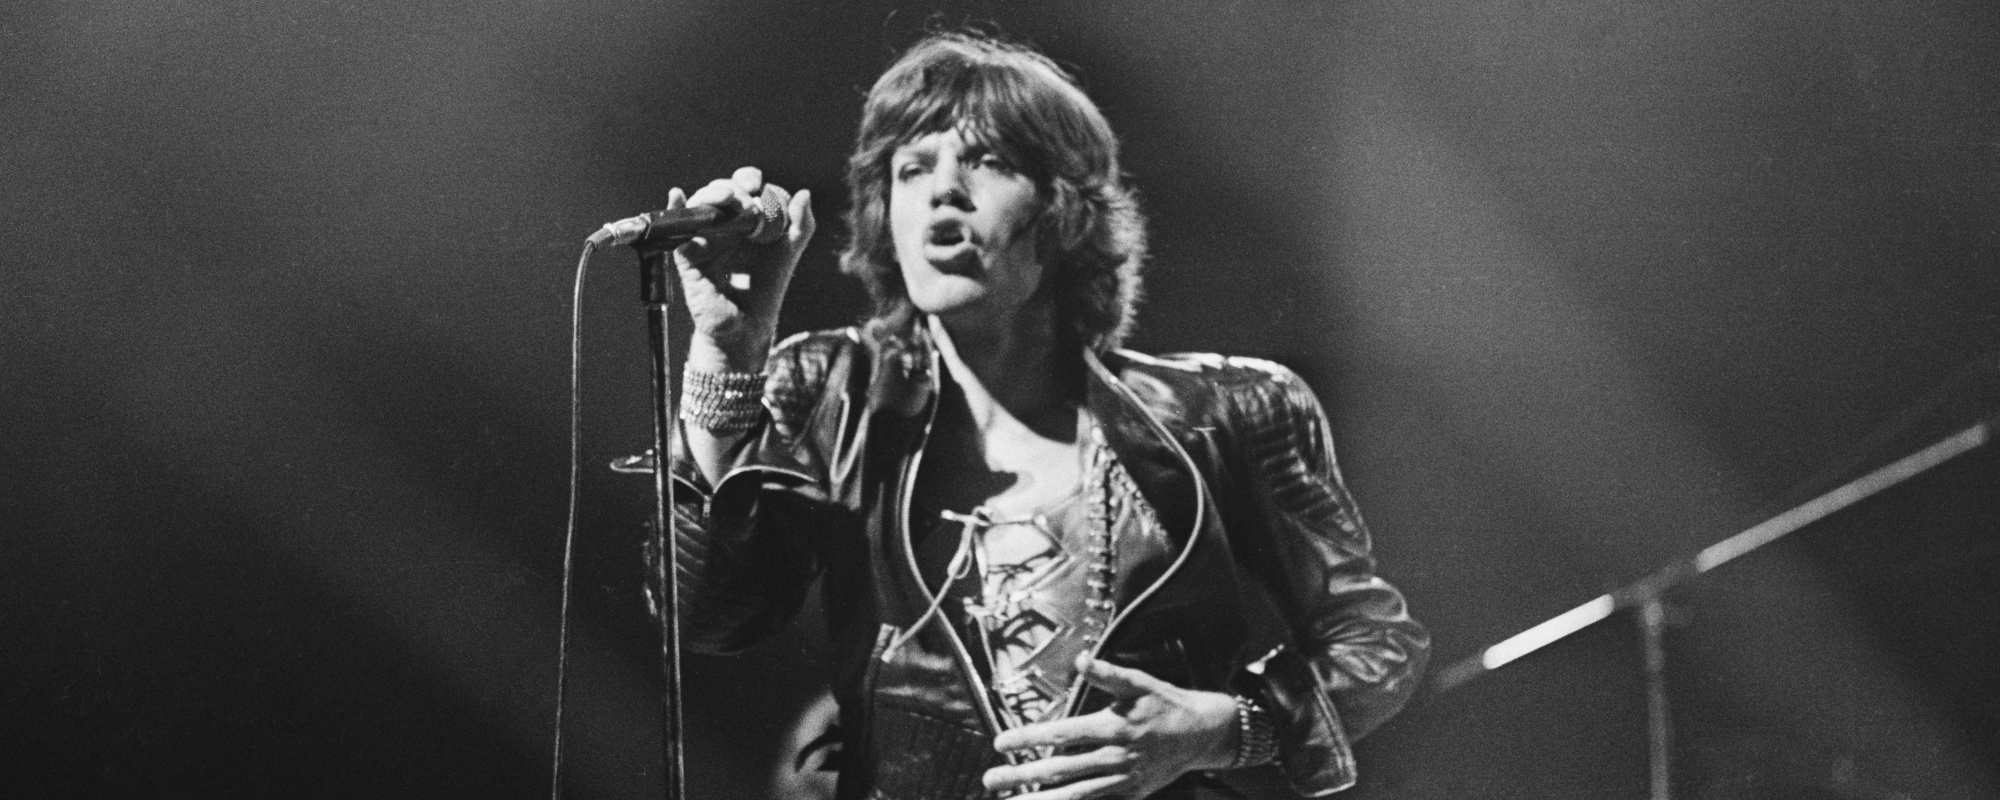 “Great Songs Write Themselves”: The Story Behind “Happy” by The Rolling Stones